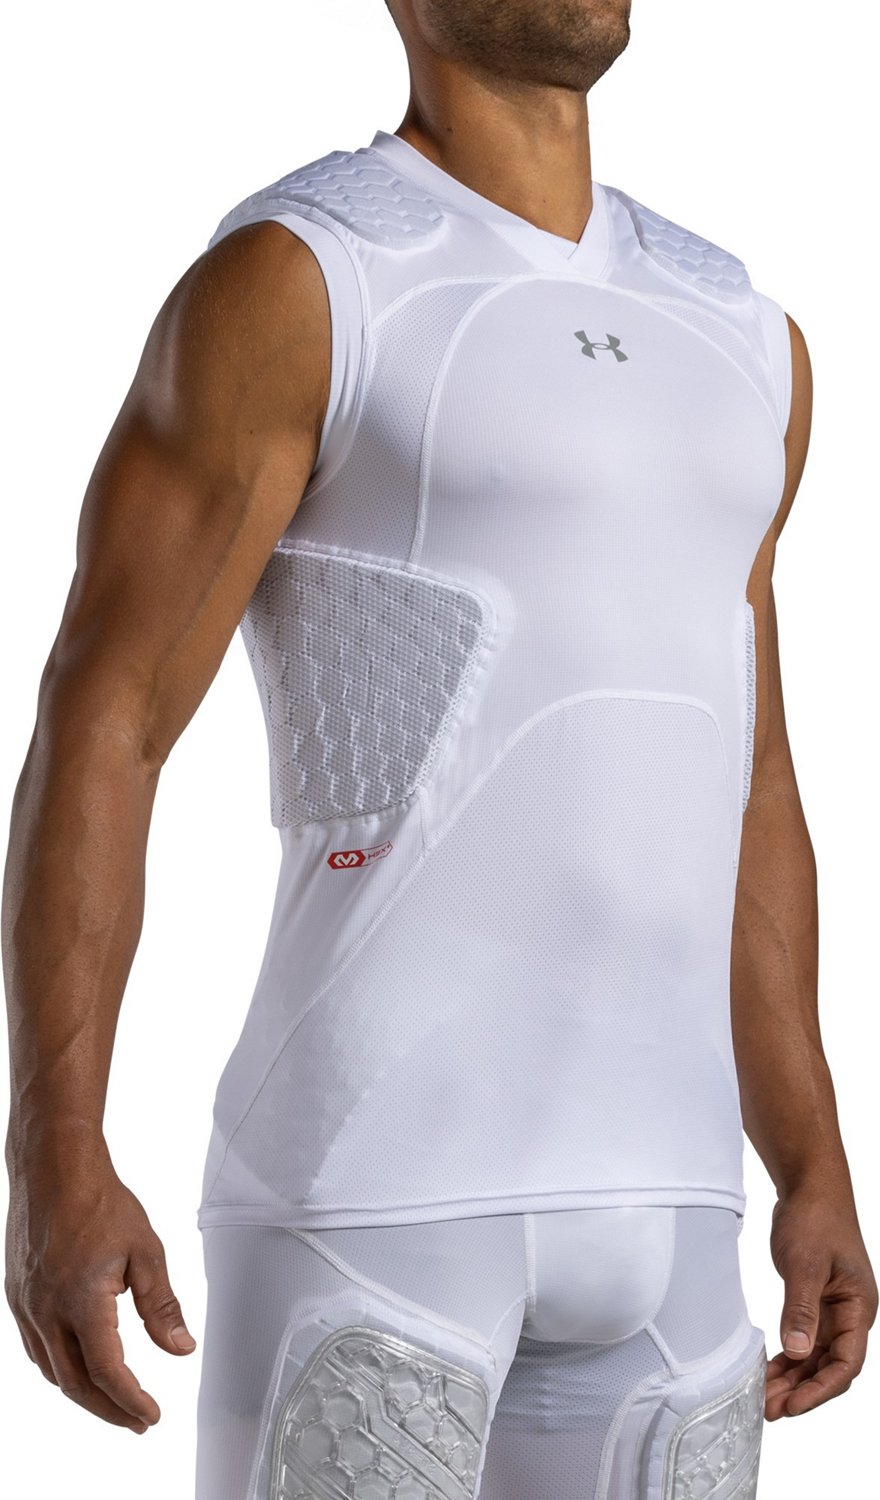 Mens Under Armour yellow Coldgear Baselayer Top